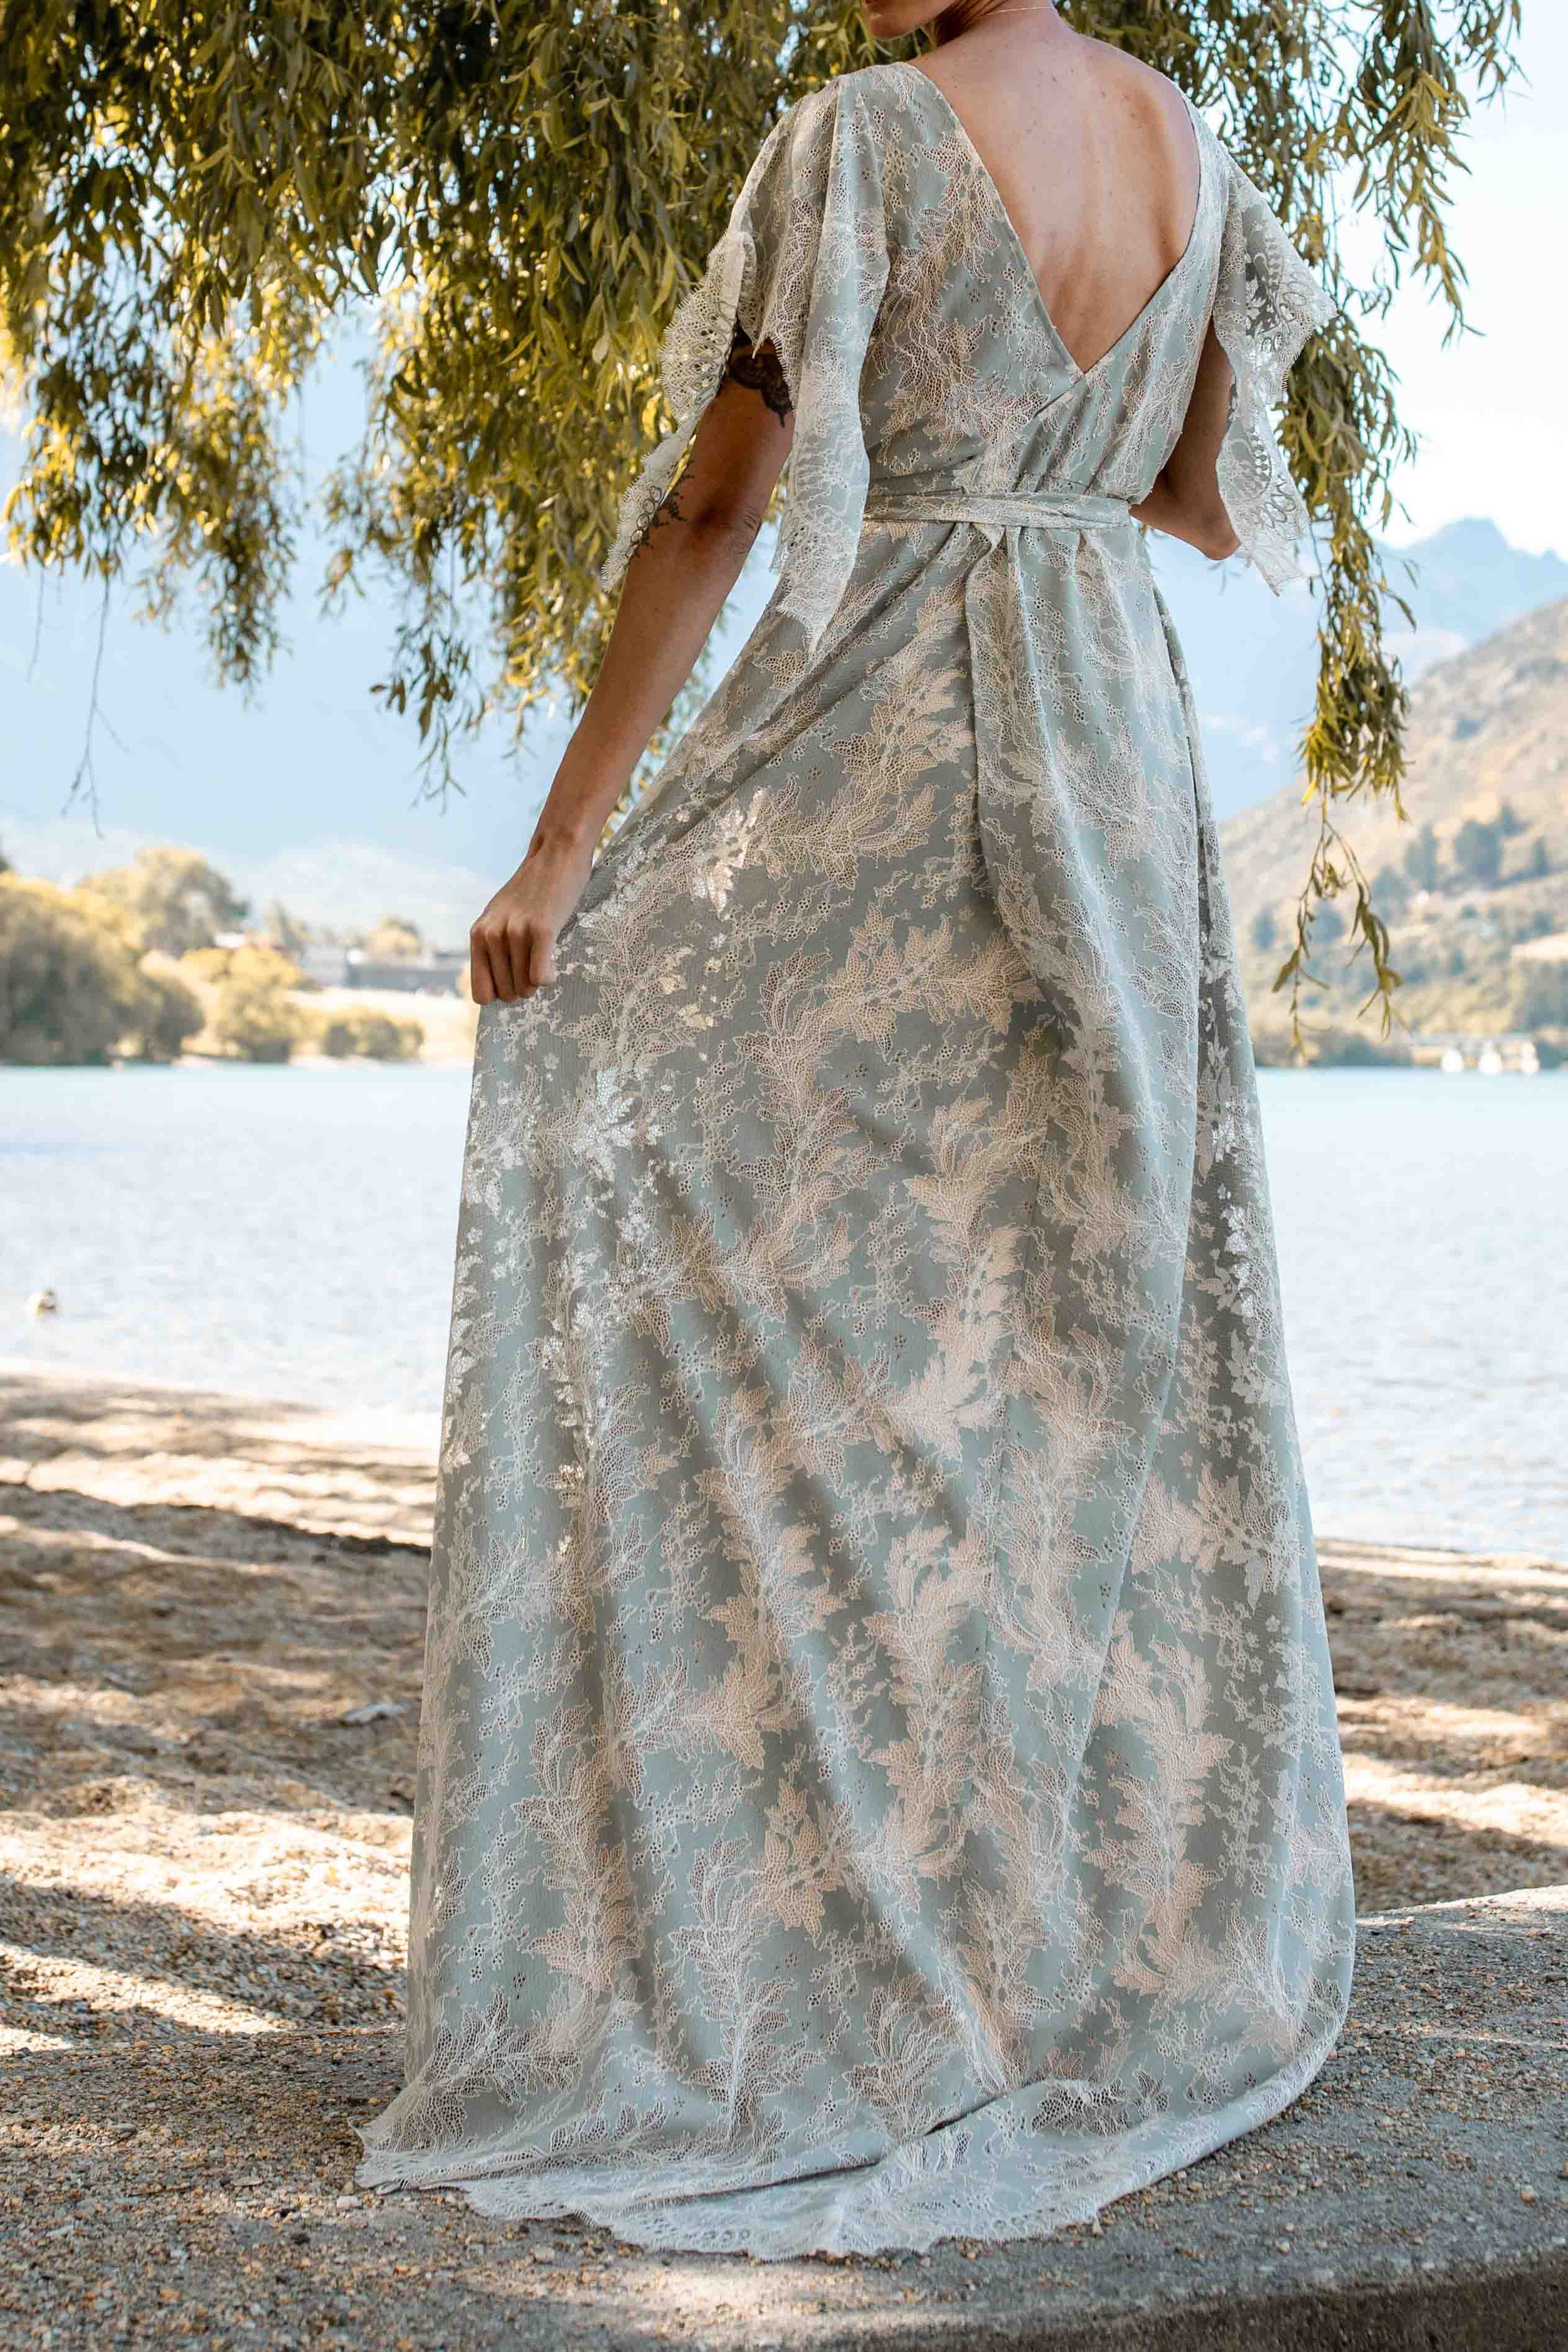 Sofia Wrap Dress in Sage w Nude Slip - Nemo Bridal Couture Queenstown New Zealand 0V9A2328.jpg